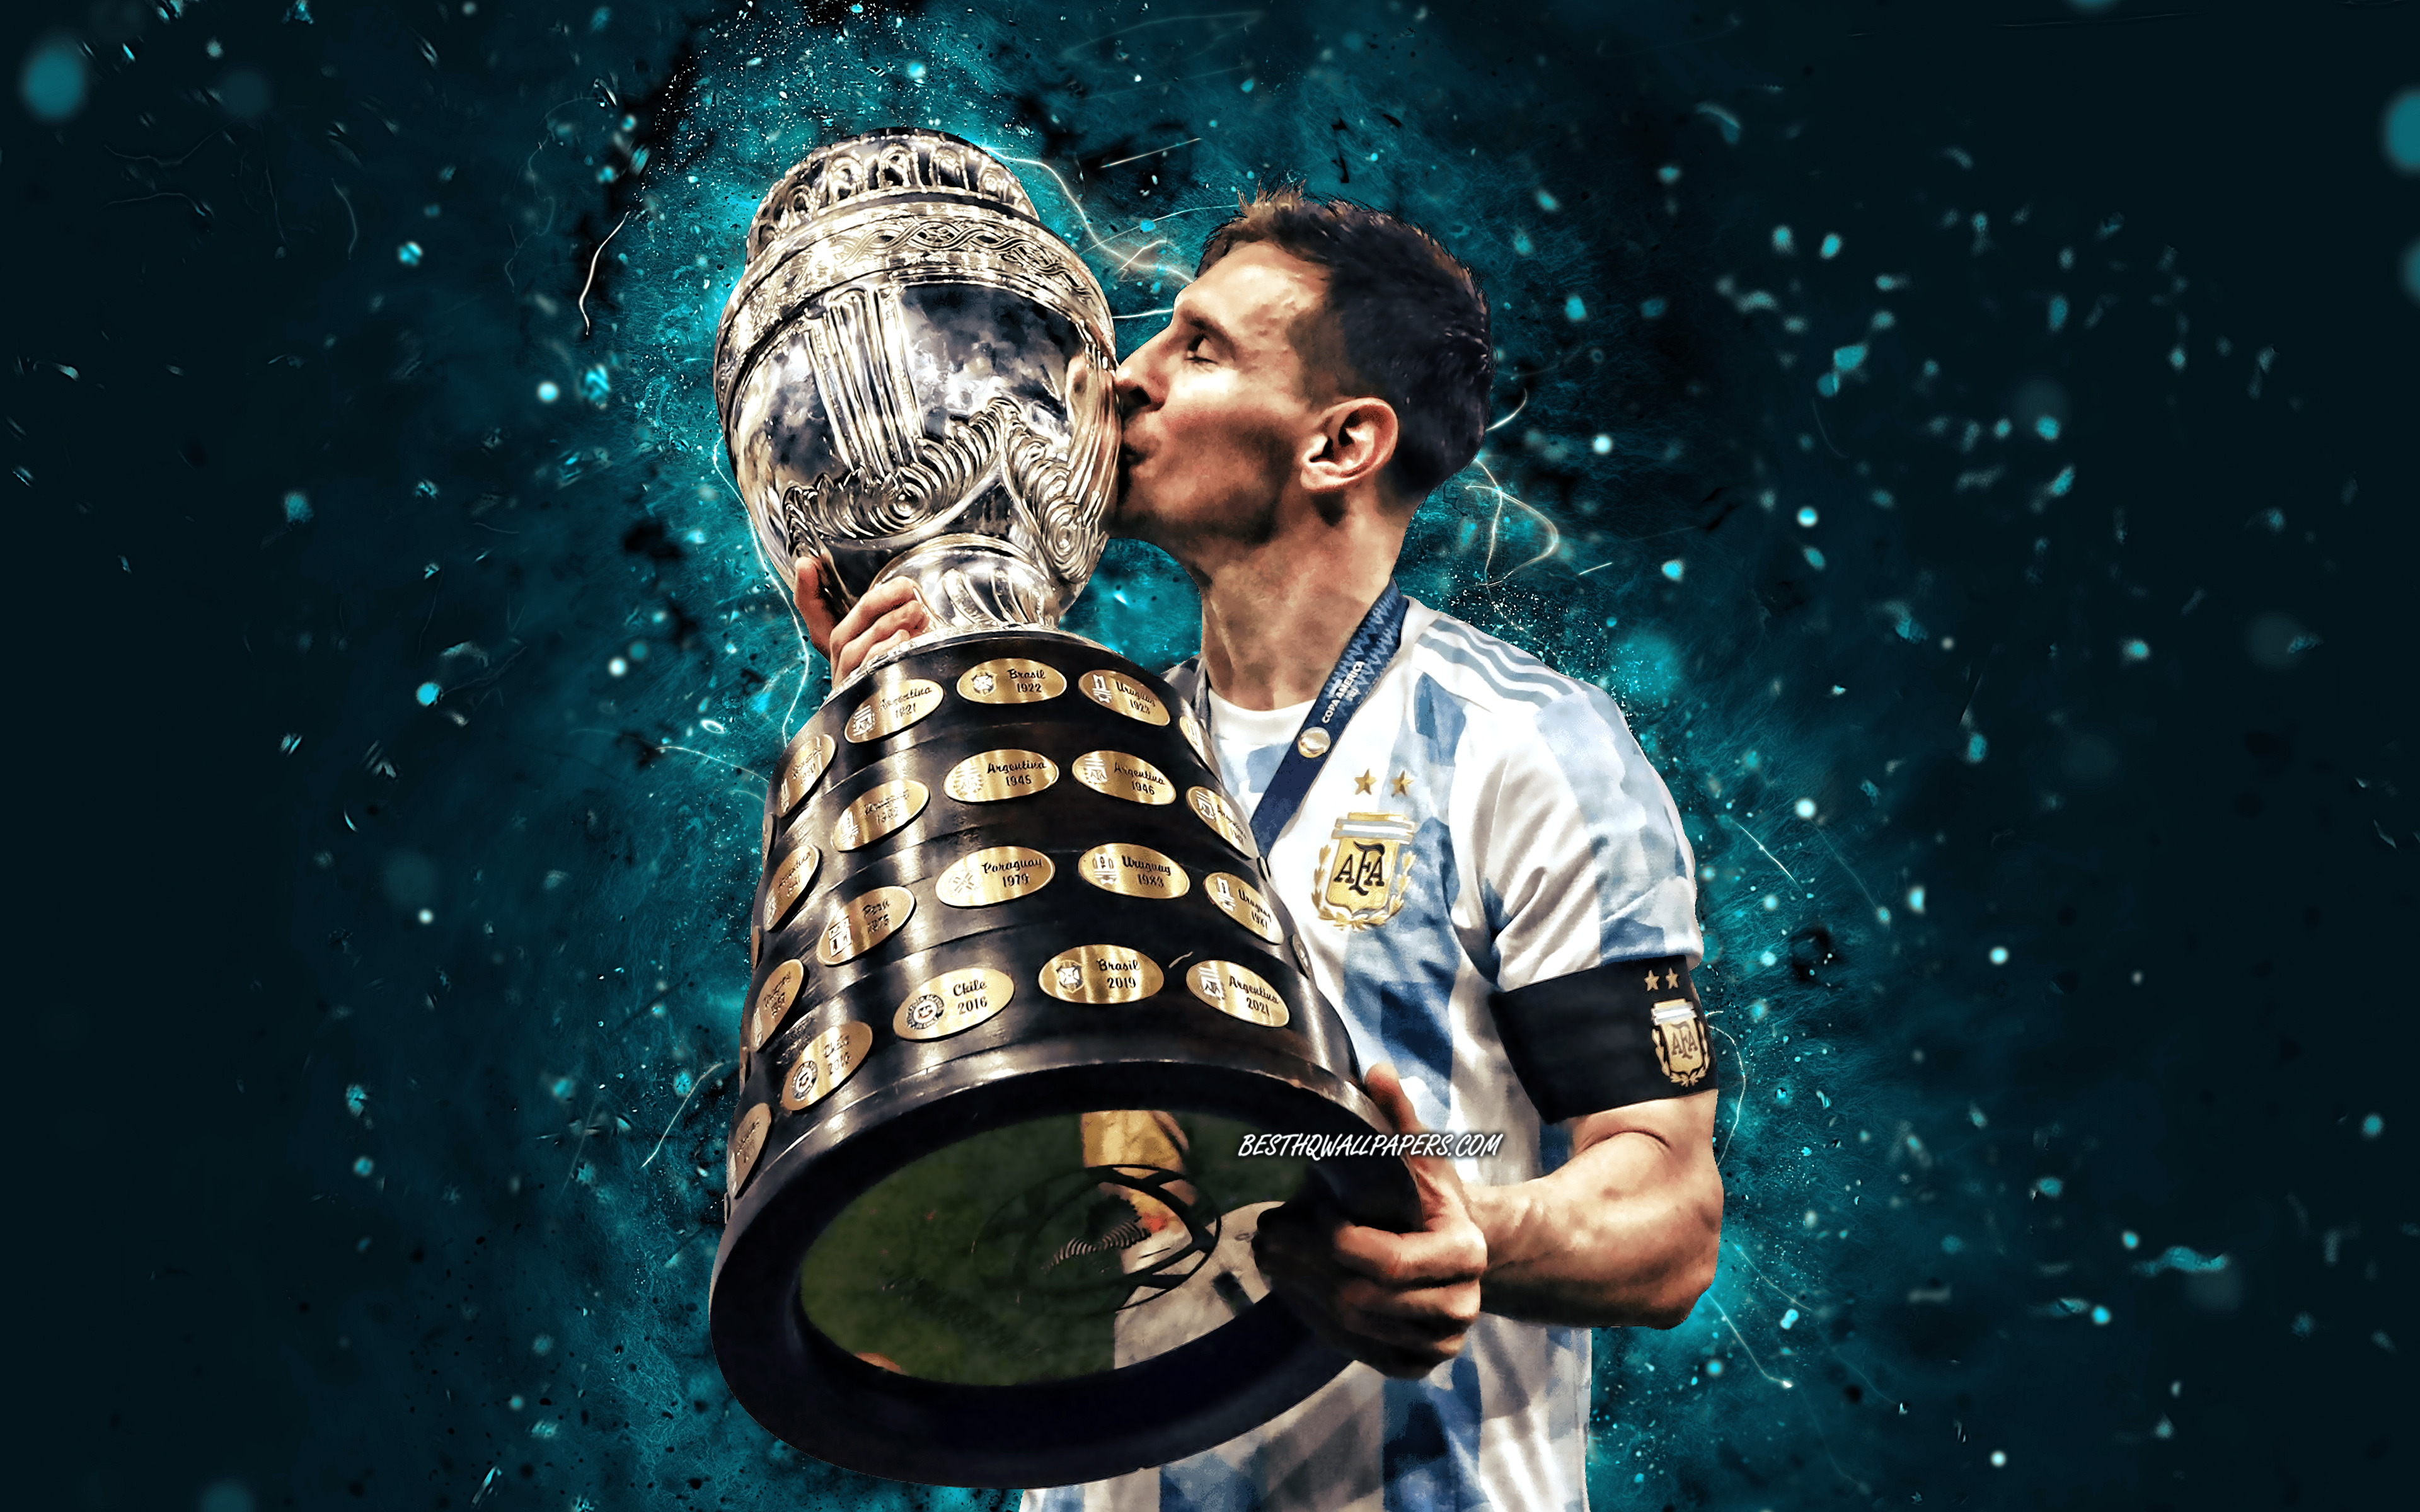 Download wallpaper Lionel Messi with cup, Argentina national football team, 4K, football stars, Leo Messi, blue neon lights, Lionel Andres Messi Cuccittini, Lionel Messi, soccer, Messi, Argentine National Team, Lionel Messi